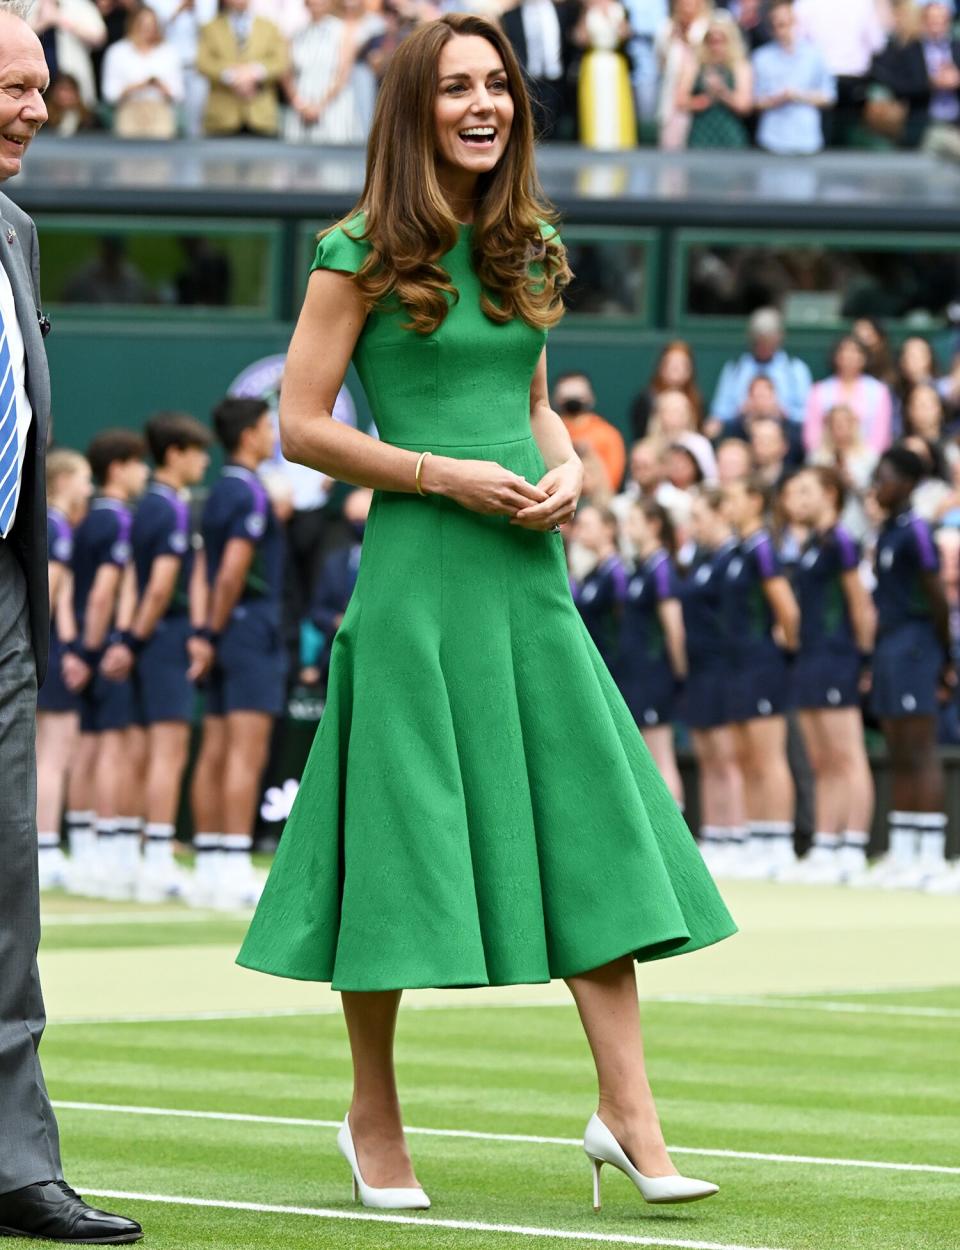 Catherine, Duchess of Cambridge attends Wimbledon Championships Tennis Tournament at All England Lawn Tennis and Croquet Club on July 10, 2021 in London, England.